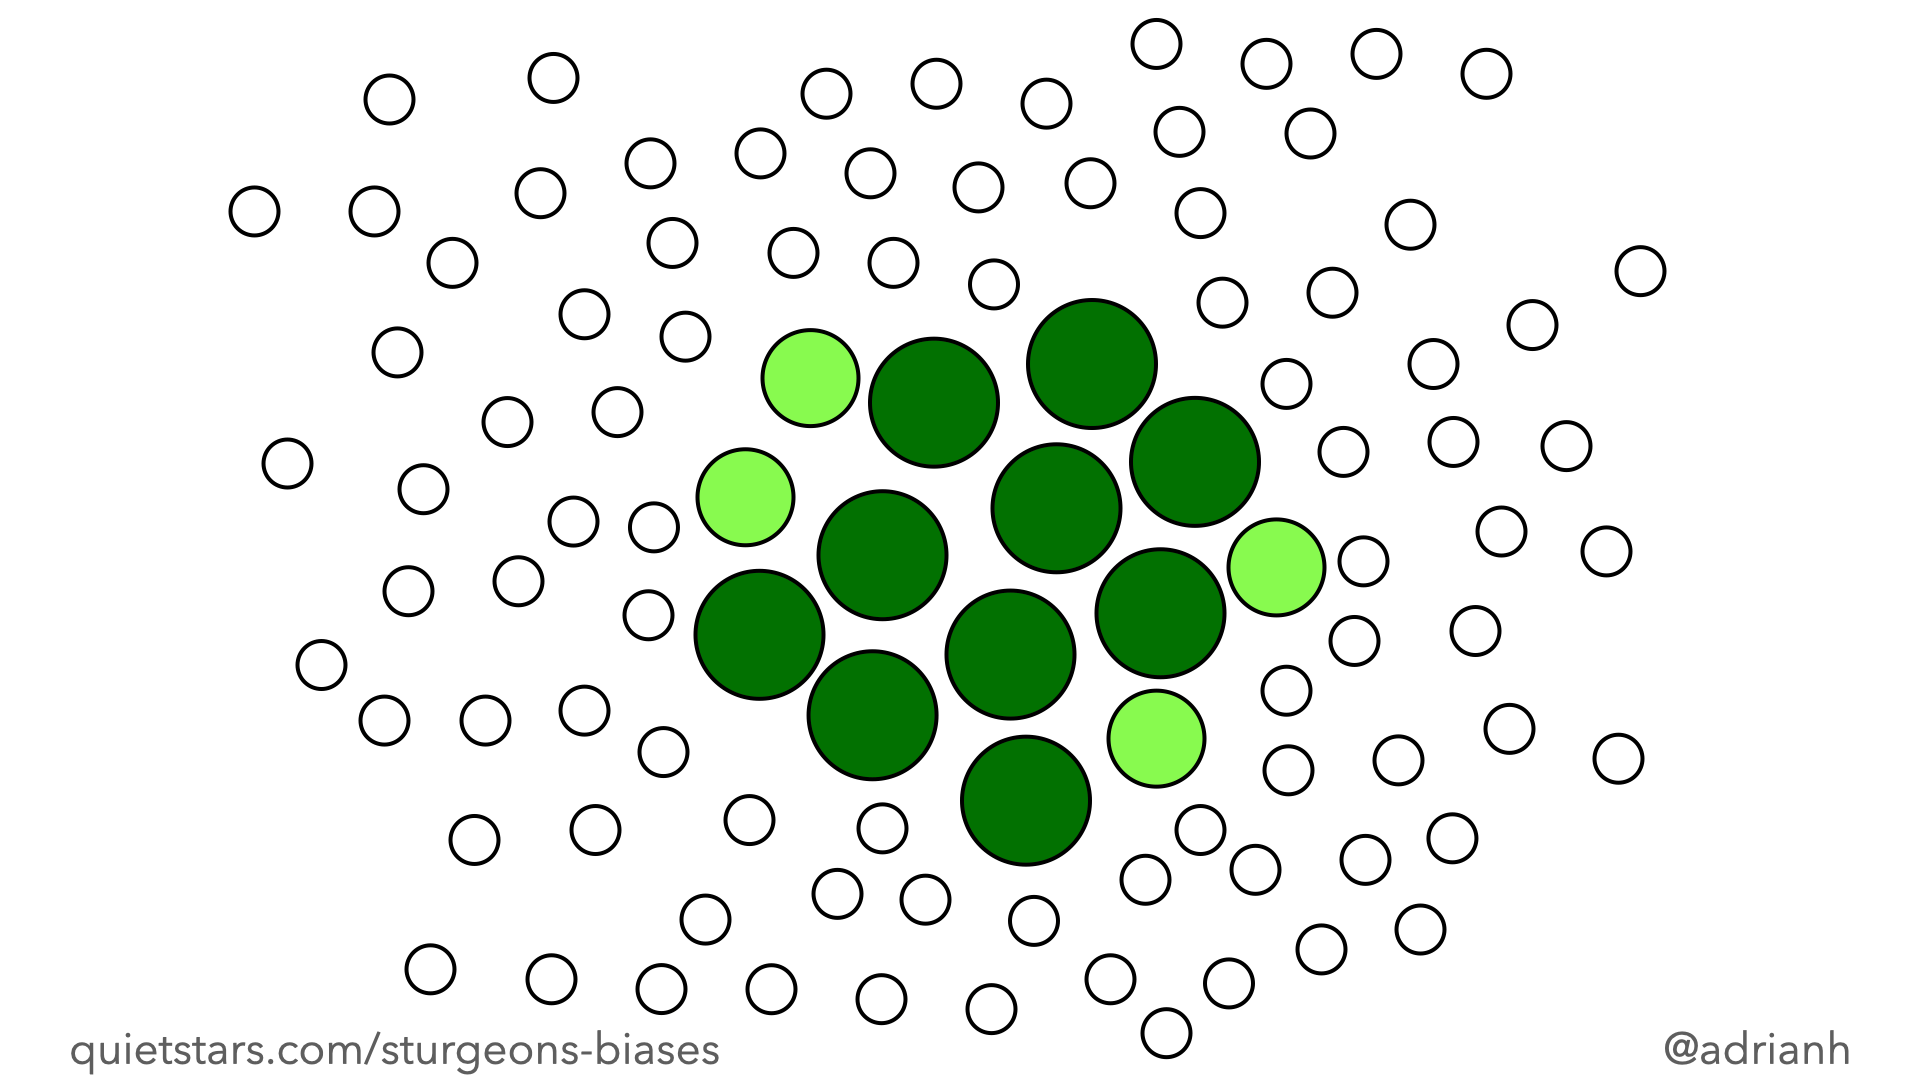 Ten large green circles and four slightly smaller light green circles are clustered in the middle of the image, surrounded by a small gap, and then 86 very small white circles. Because of their size the green circles domainate the image.